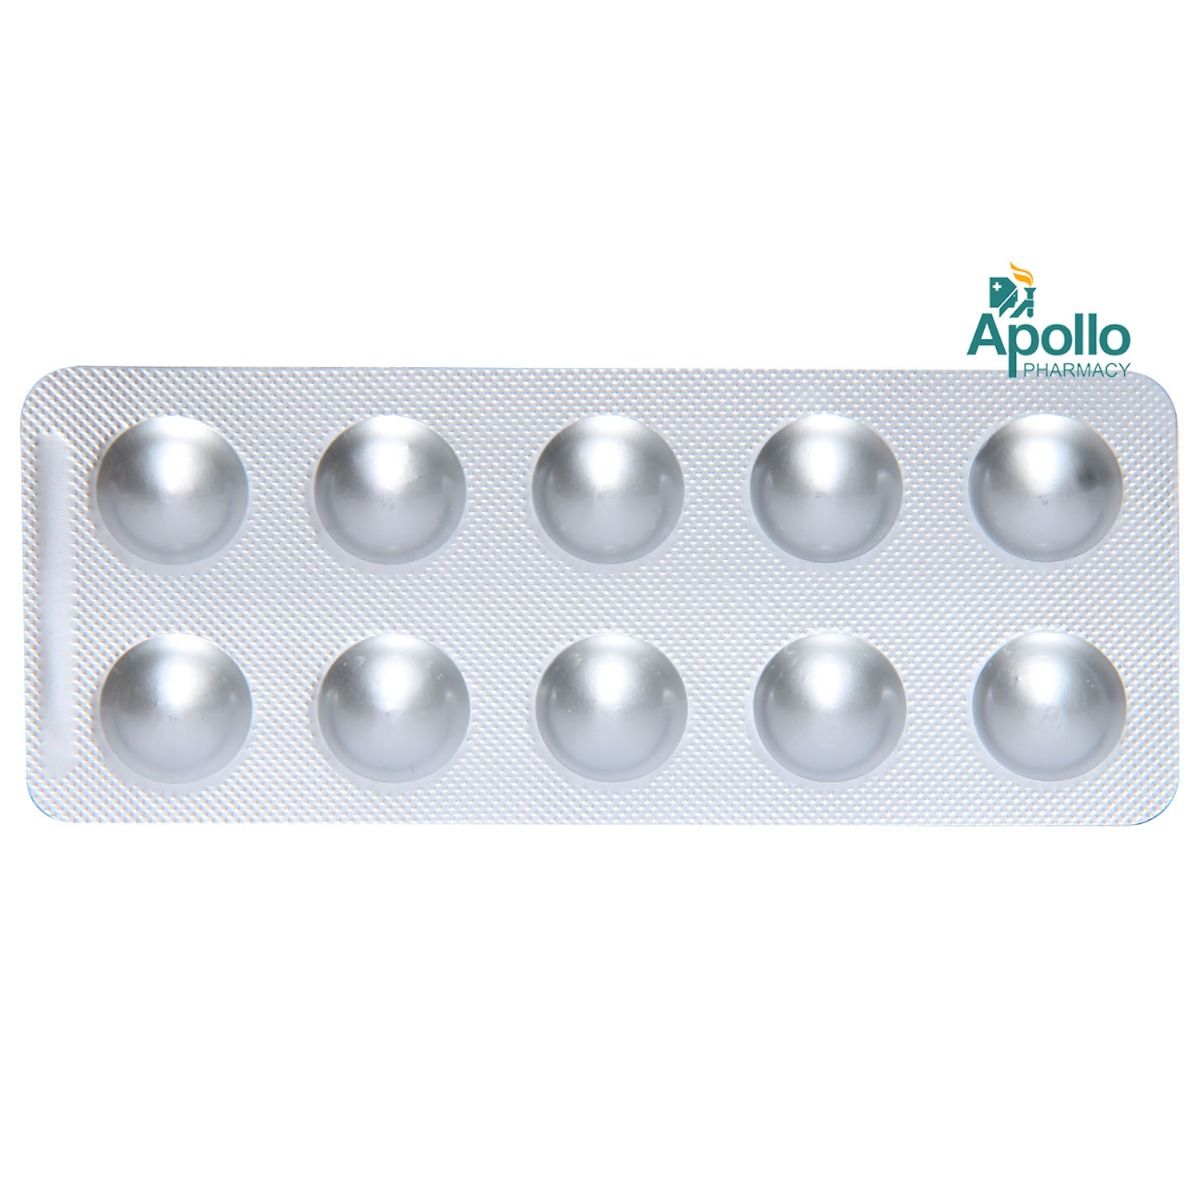 Tenali Tablet 10's, Pack of 10 TABLETS